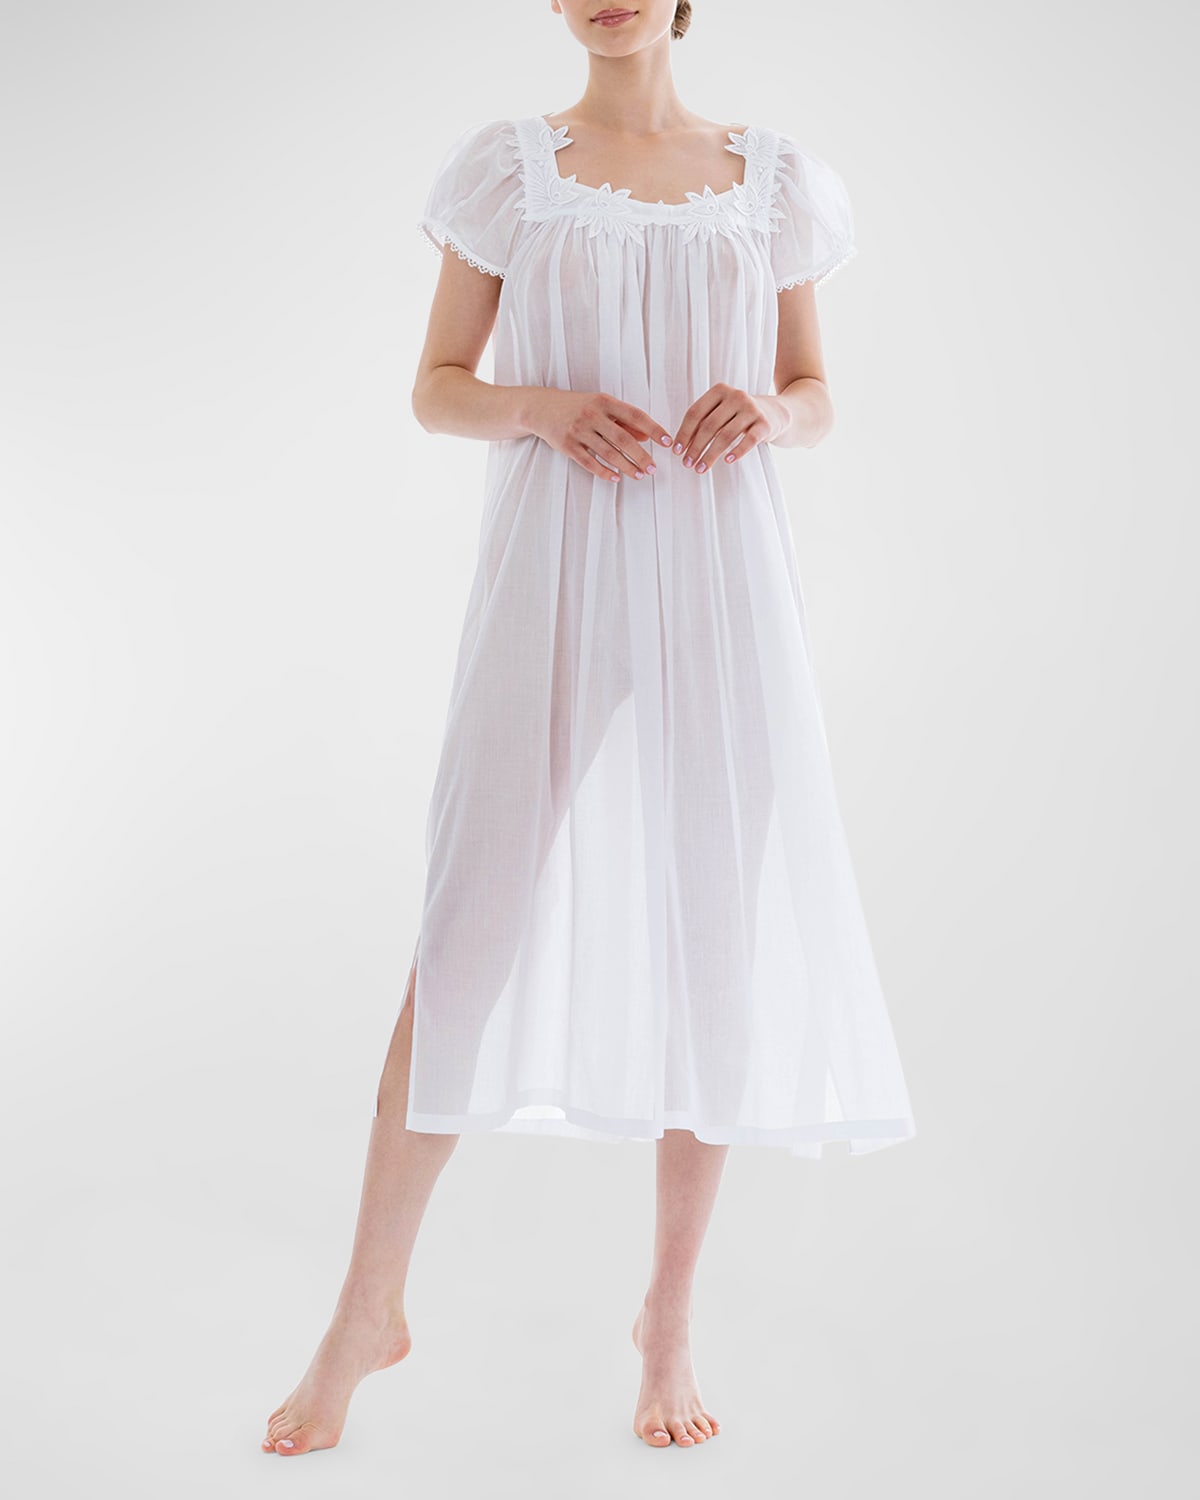 Celestine Florence 2 Ruched Lace-Trim Cotton Nightgown